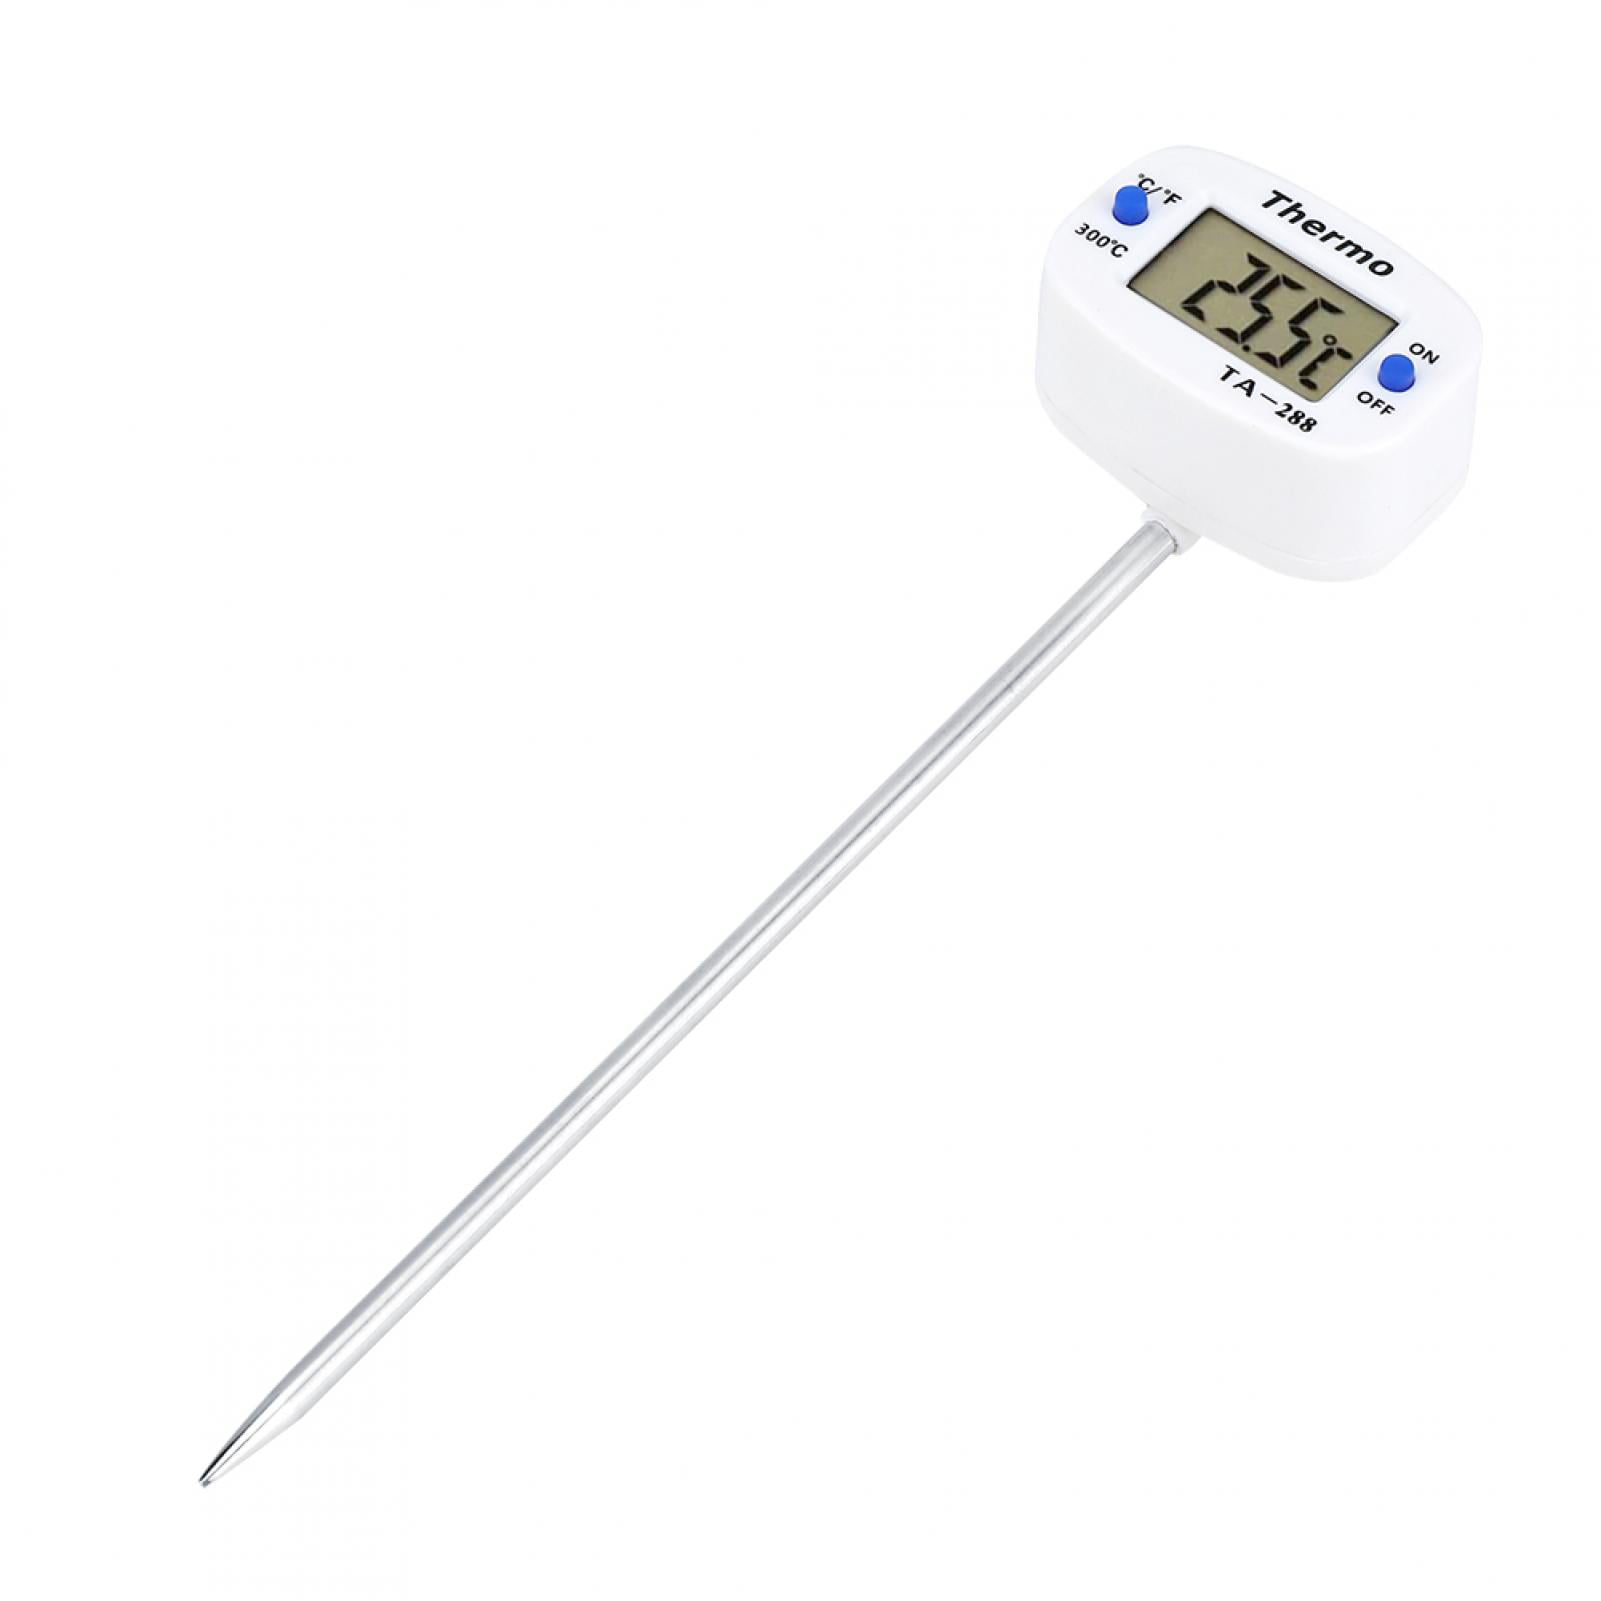 Pin Shape Digital Termometer Instant Read Kitchen Cooking Thermometer 